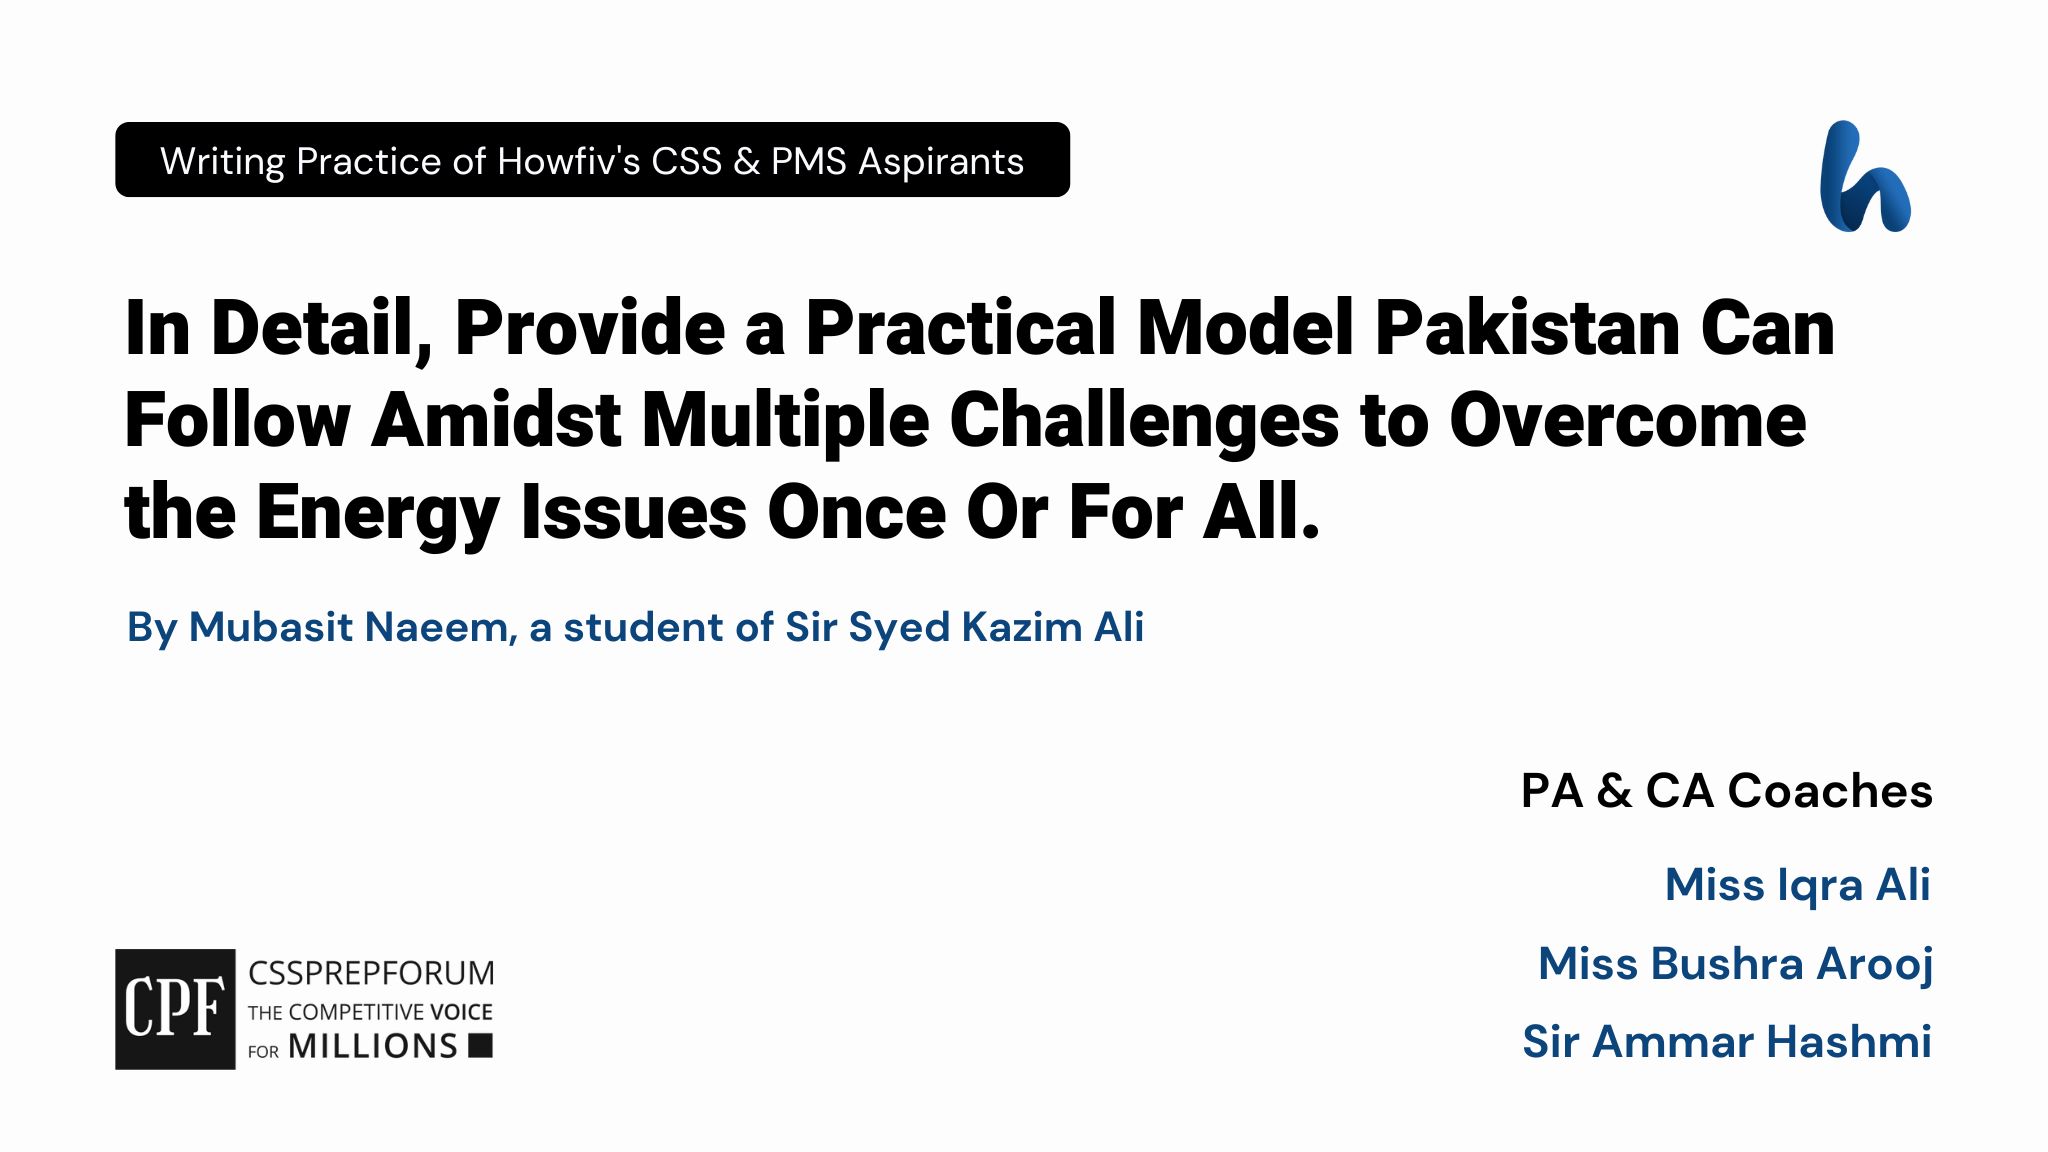 CSS Current Affairs article | Practical Model to Overcome Pakistan's Energy Issues | is written by Mubasit Naeem Under the Supervision of Sir Ammar Hashmi...